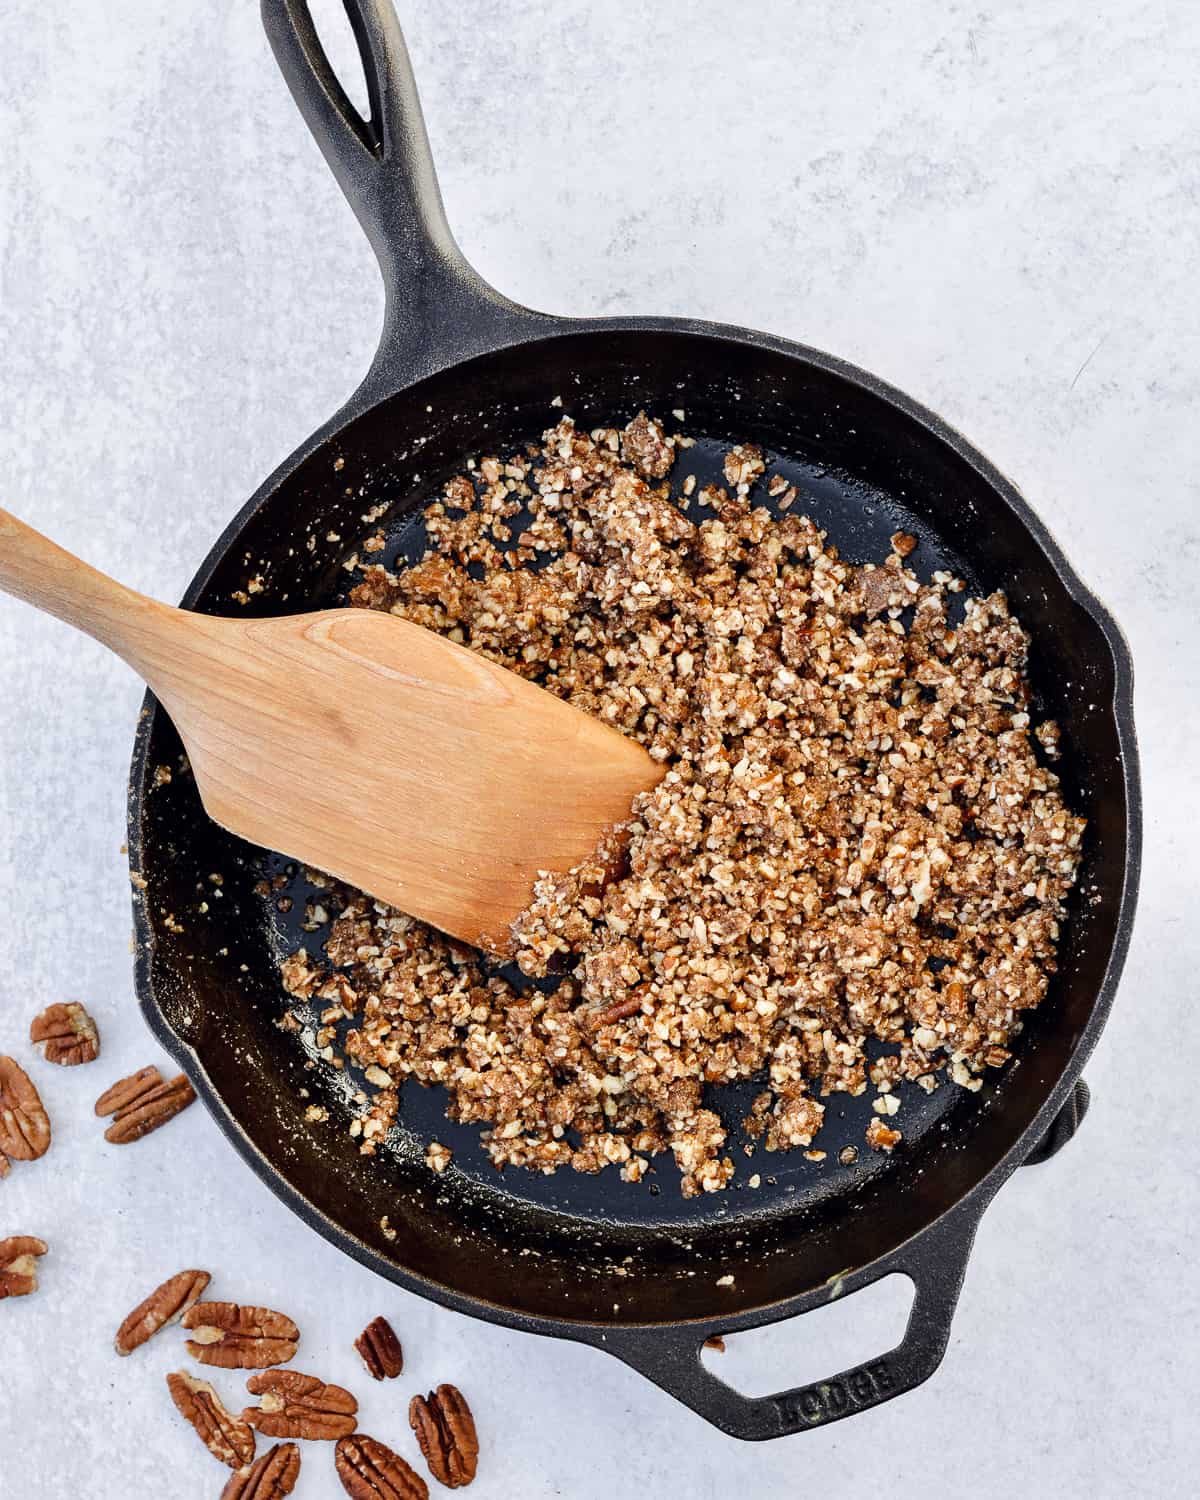 Cast iron skillet with chopped pecans and a wooden spatula.